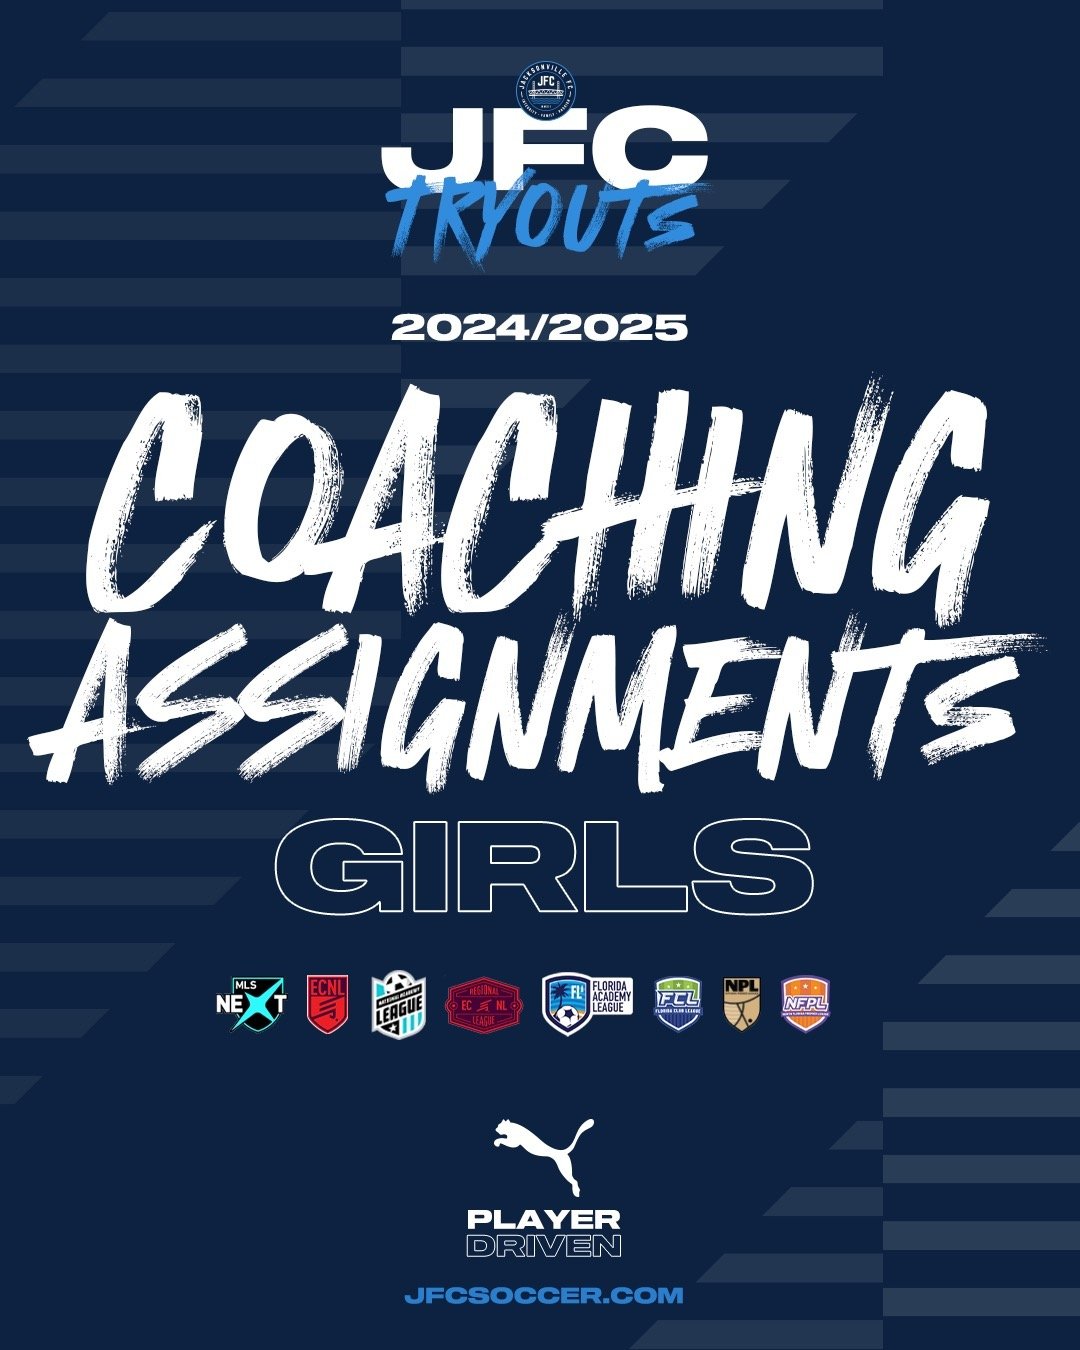 Introducing our full 24/25 JFC Girls Coaching Staff!!! Let's Go!!!

Click the link in our profile to see our 24/25 Girls Coaching Assignments.

#PlayerDriven #904JFC